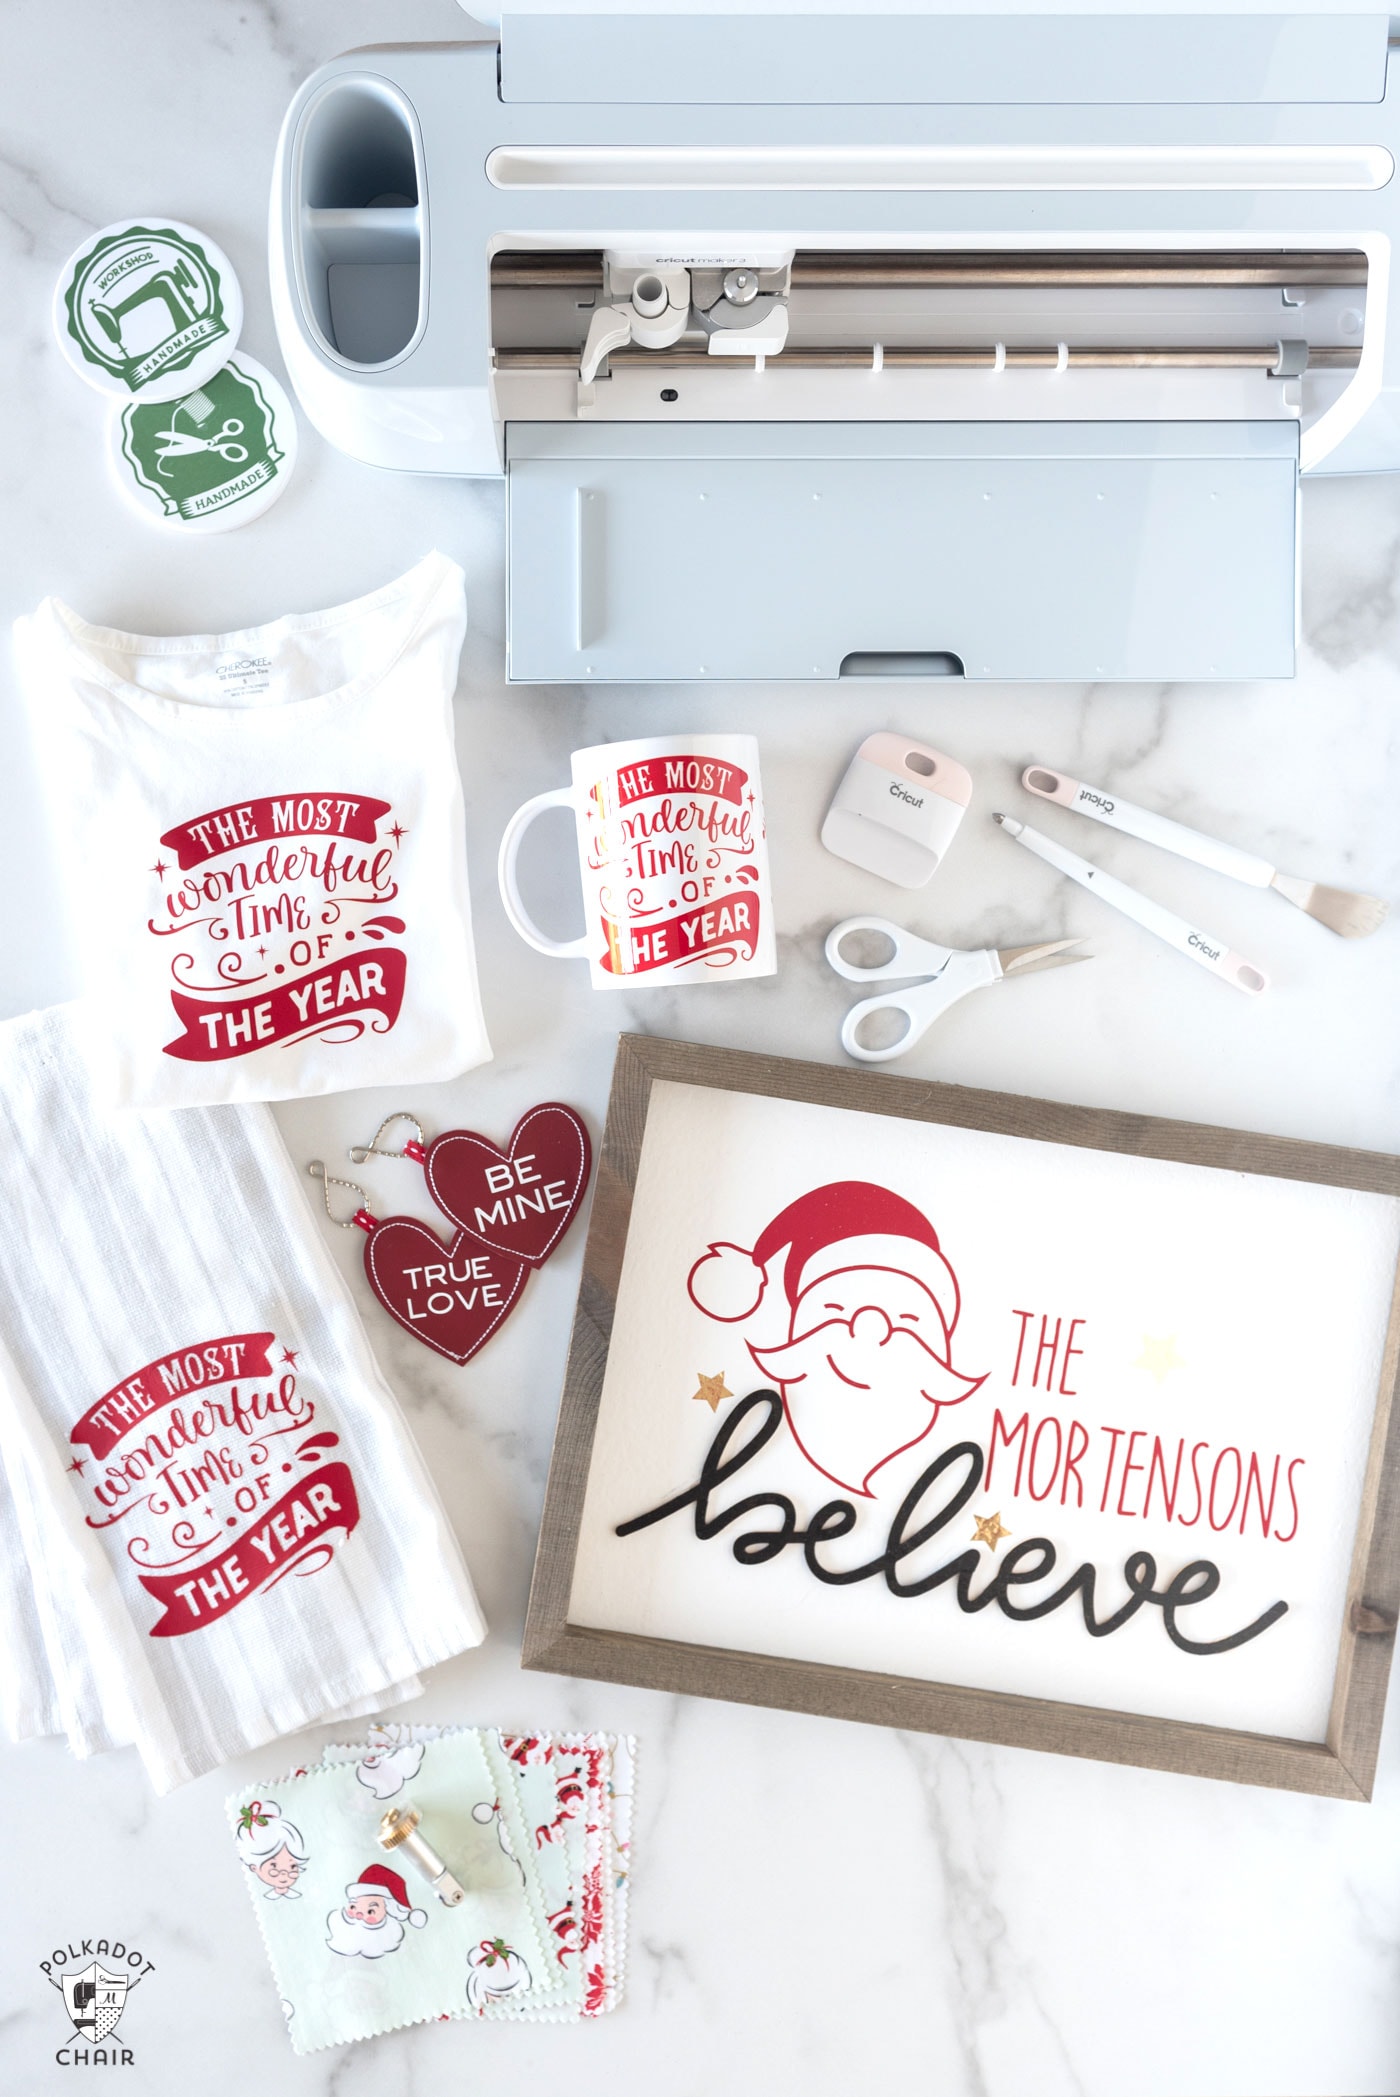 Take a Look at the Evolution of Cricut Machines - Try It - Like It - Create  it